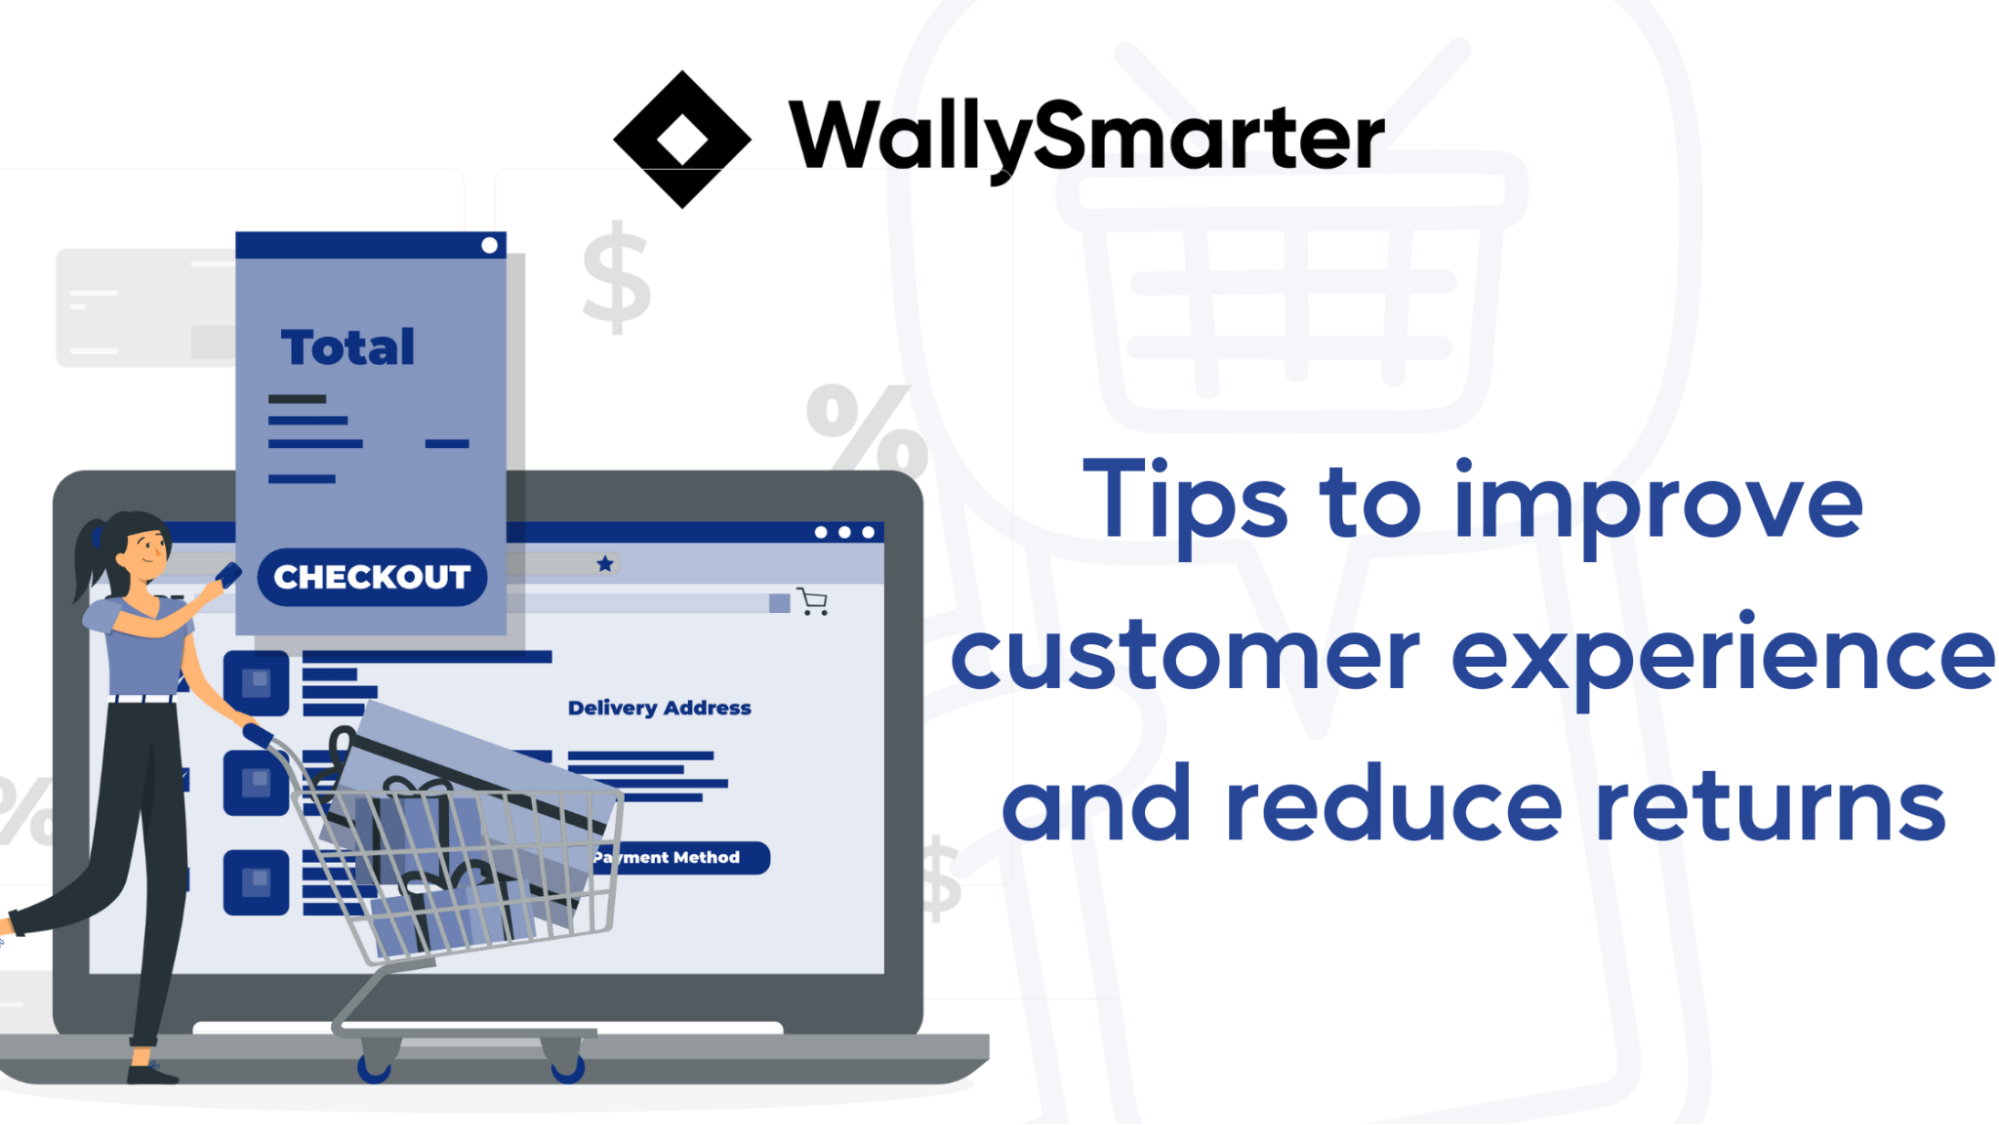 Tips to improve customer experience and reduce returns